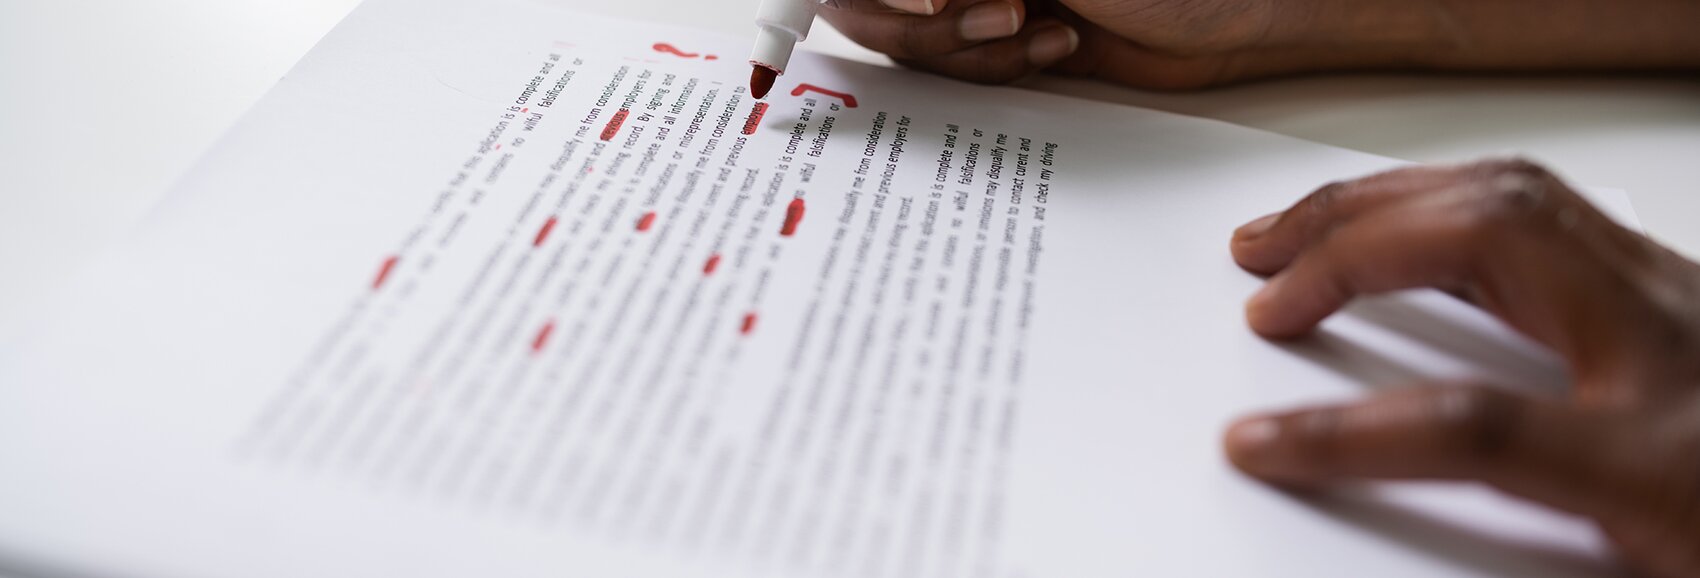 someone is marking a text with a red pen